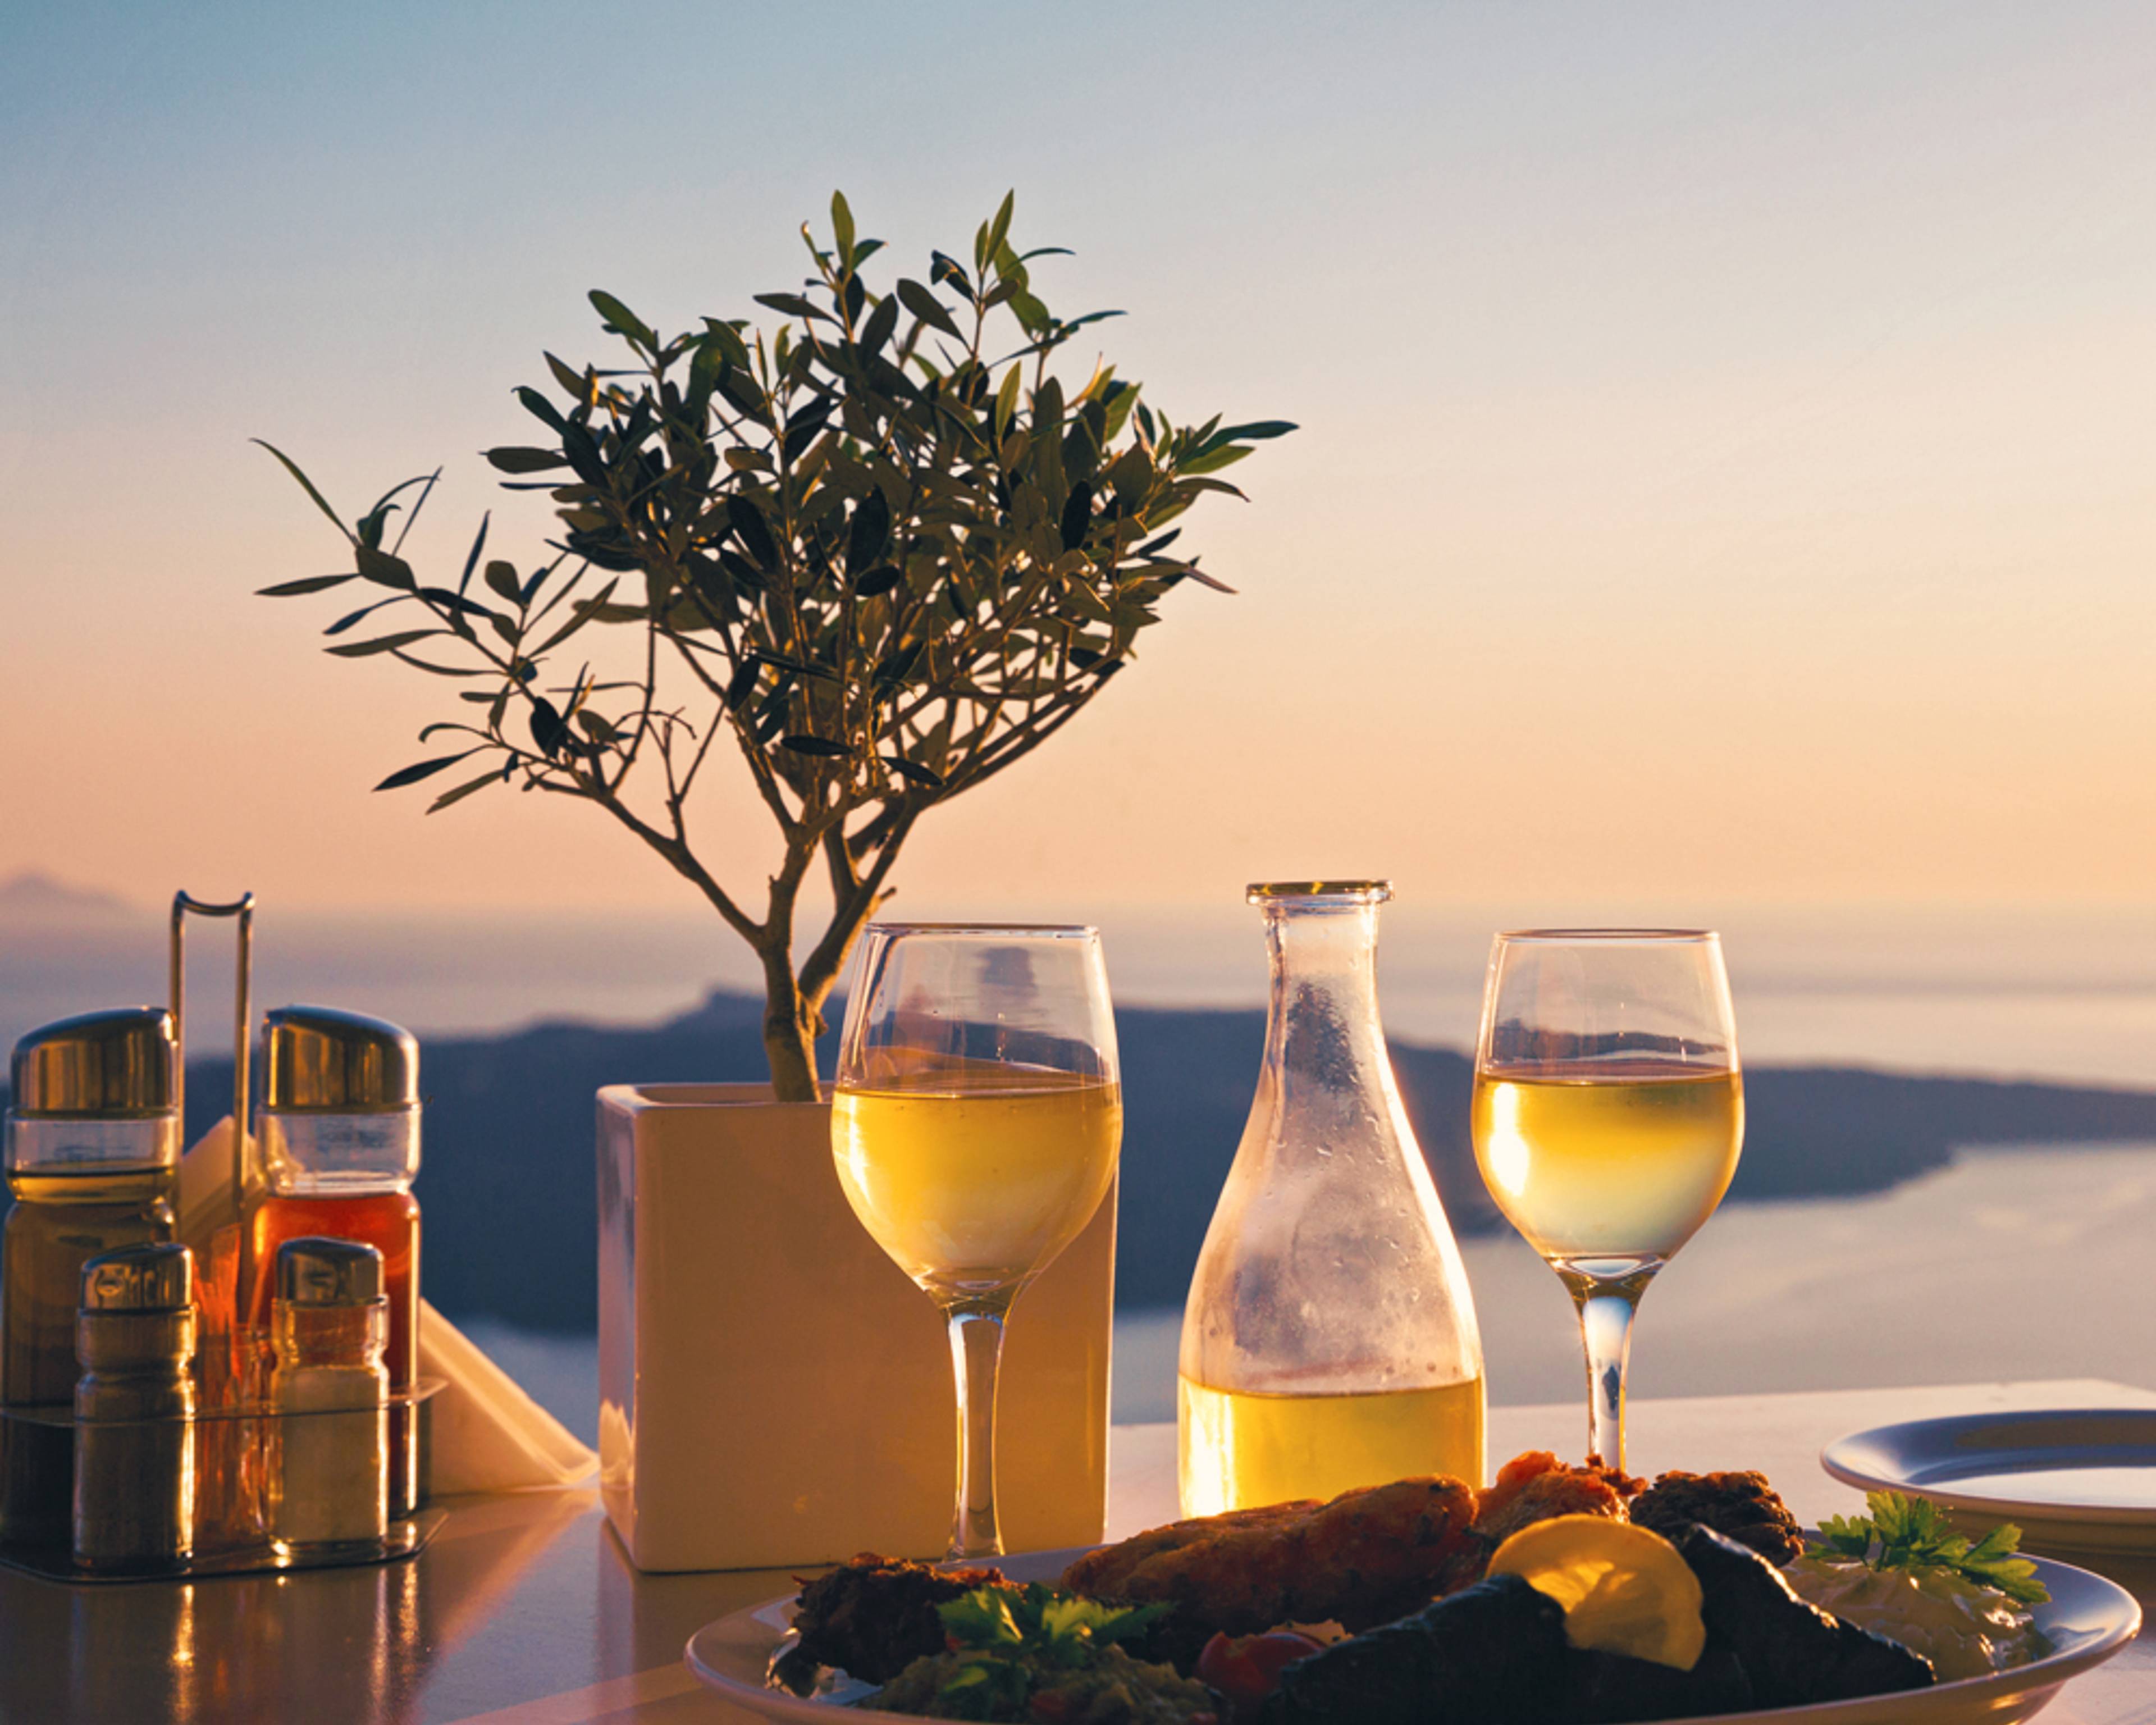 Food & Wine Tours in Greece | Food Tasting and Vineyard Tours